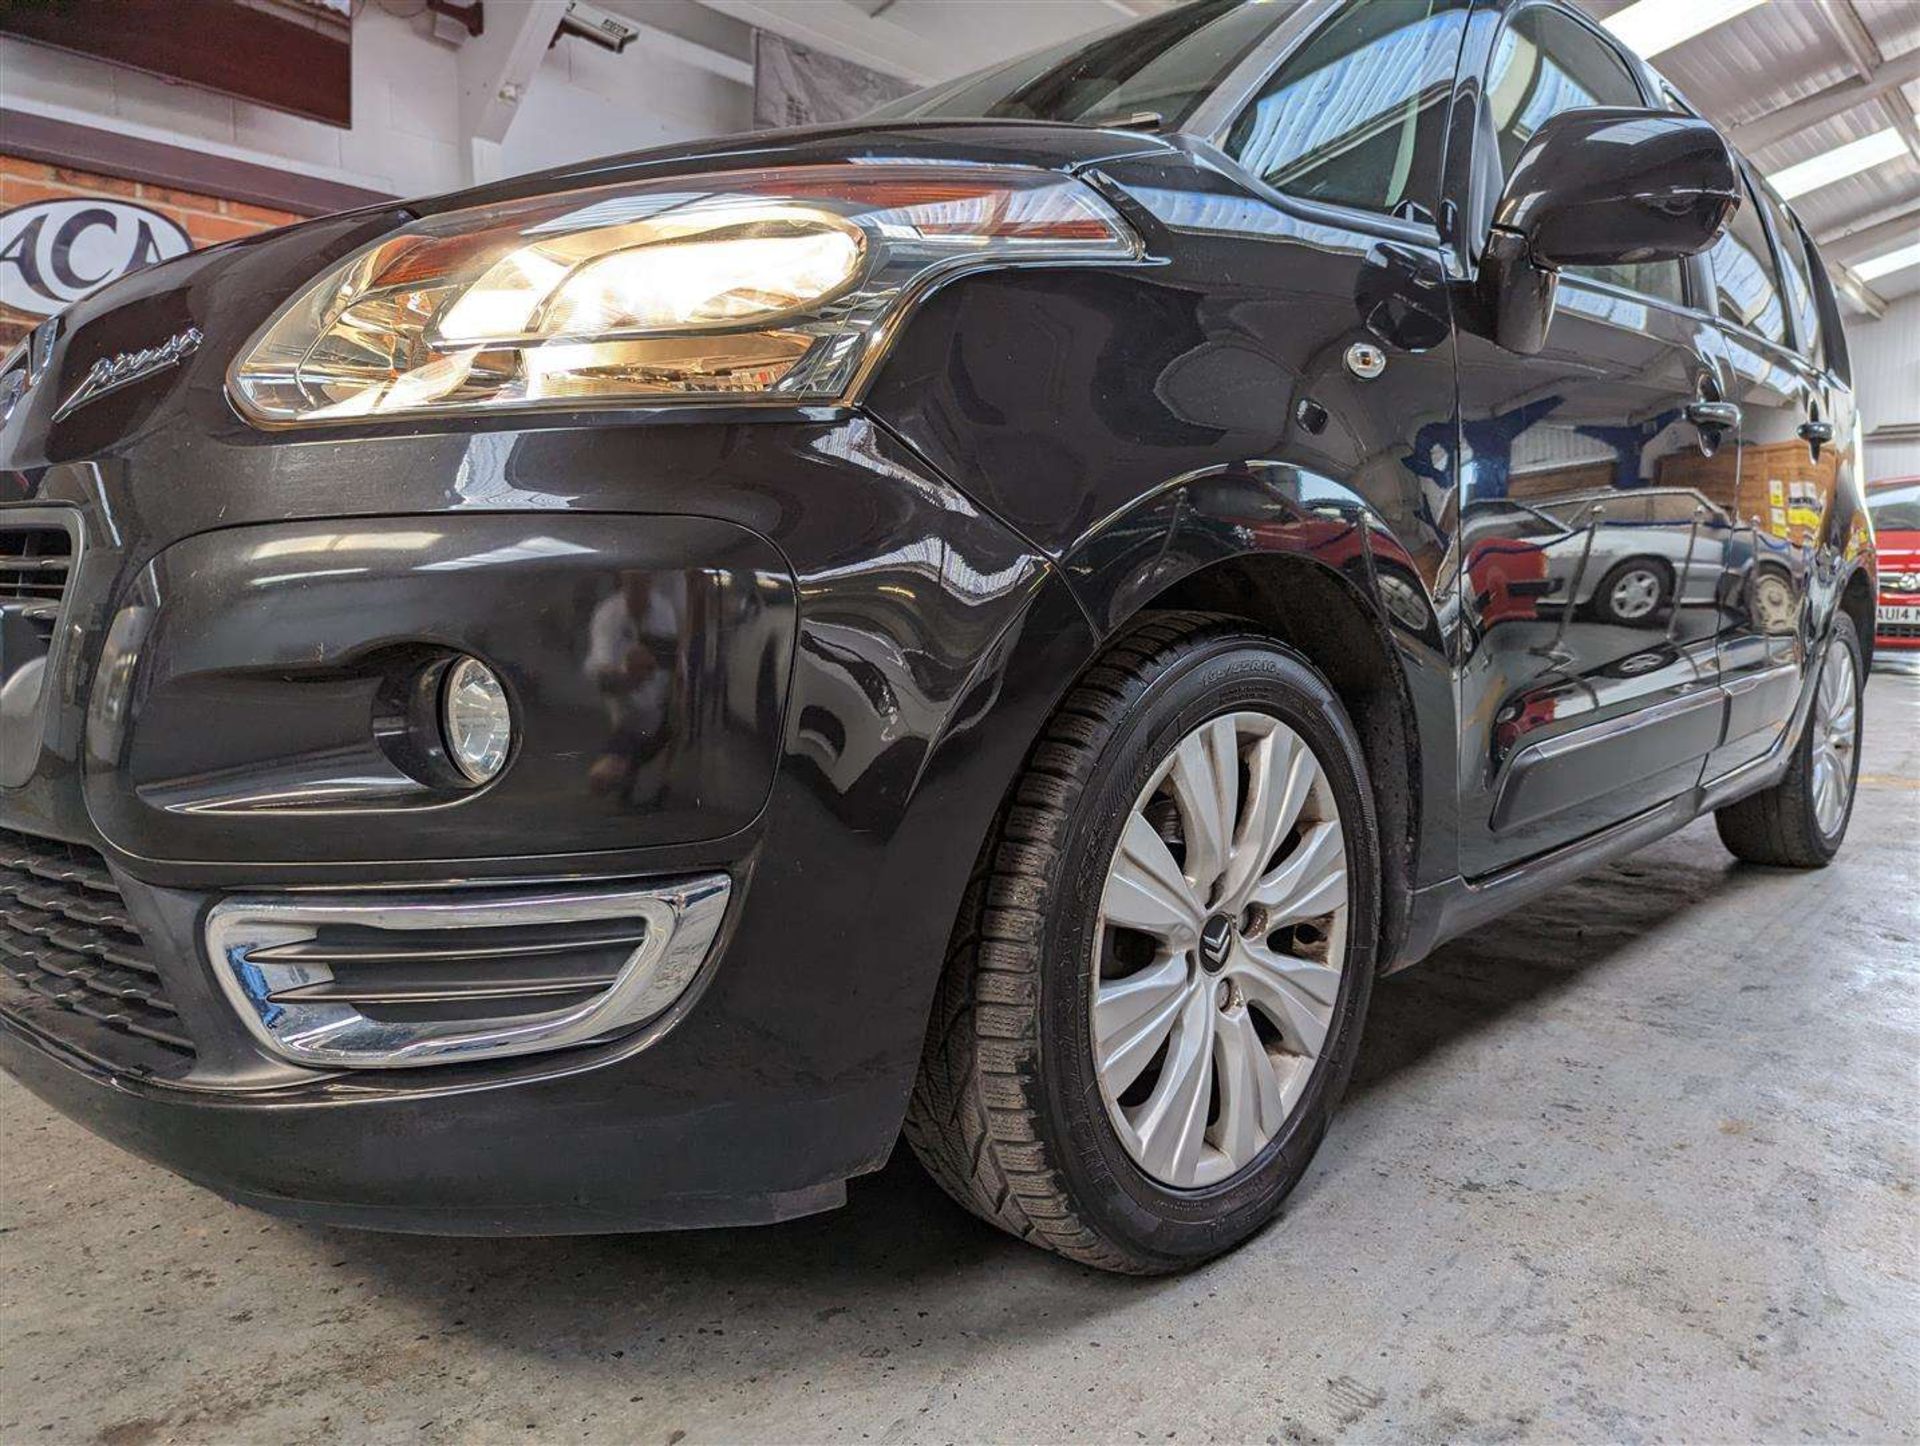 2011 CITROEN C3 PICASSO EXCLUSIVE HDI - Image 18 of 25